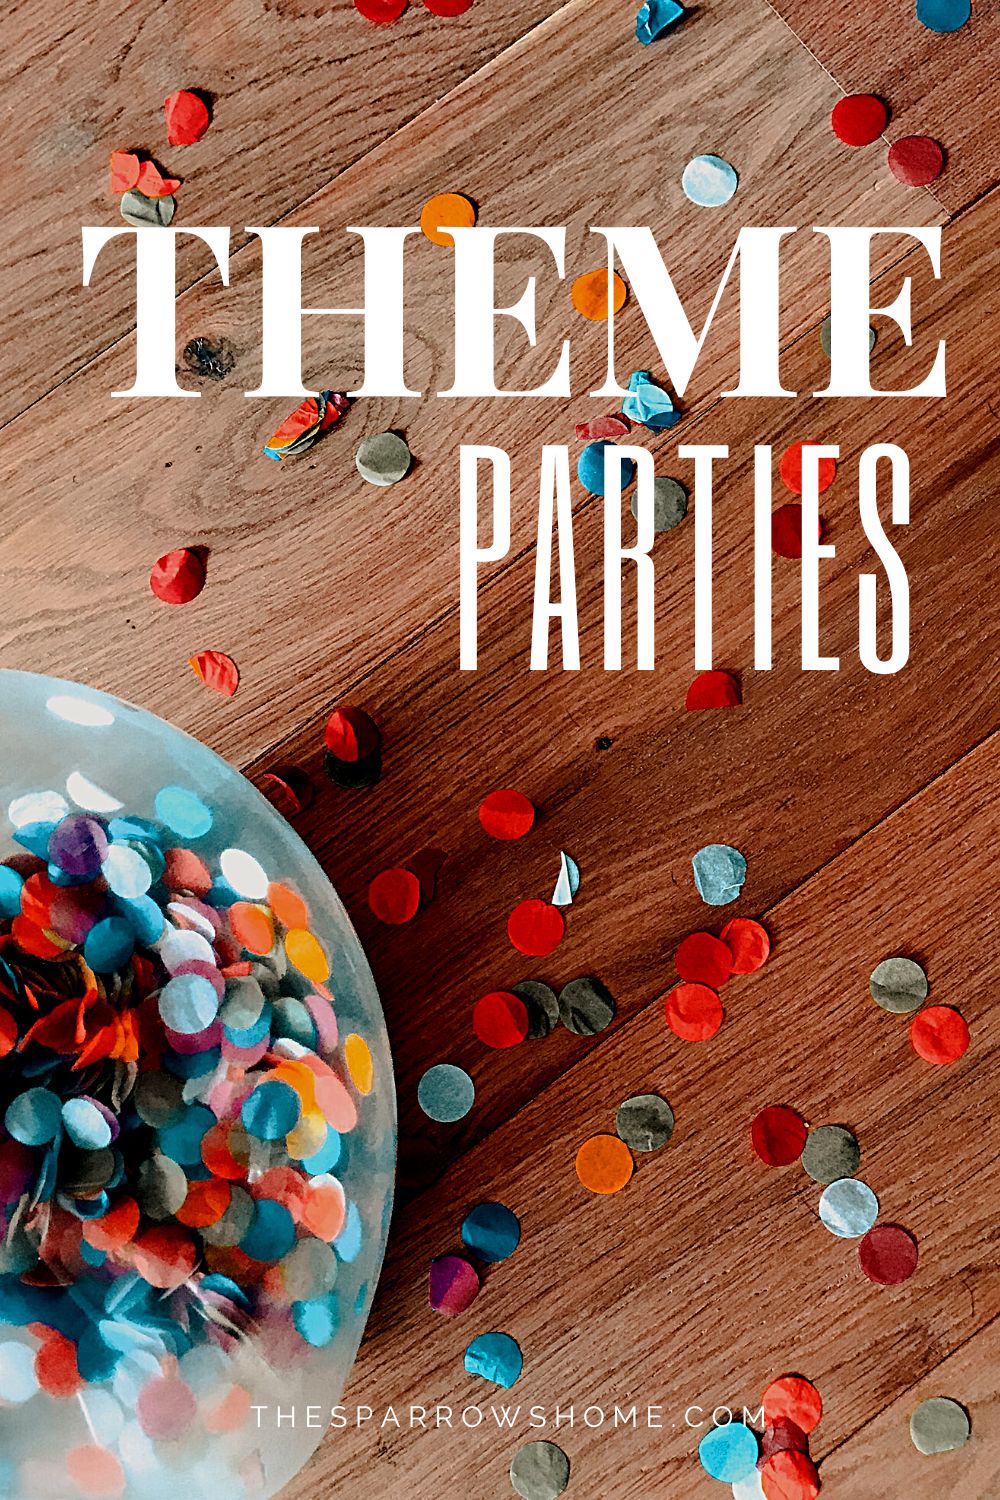 Do you dig a party with a theme?